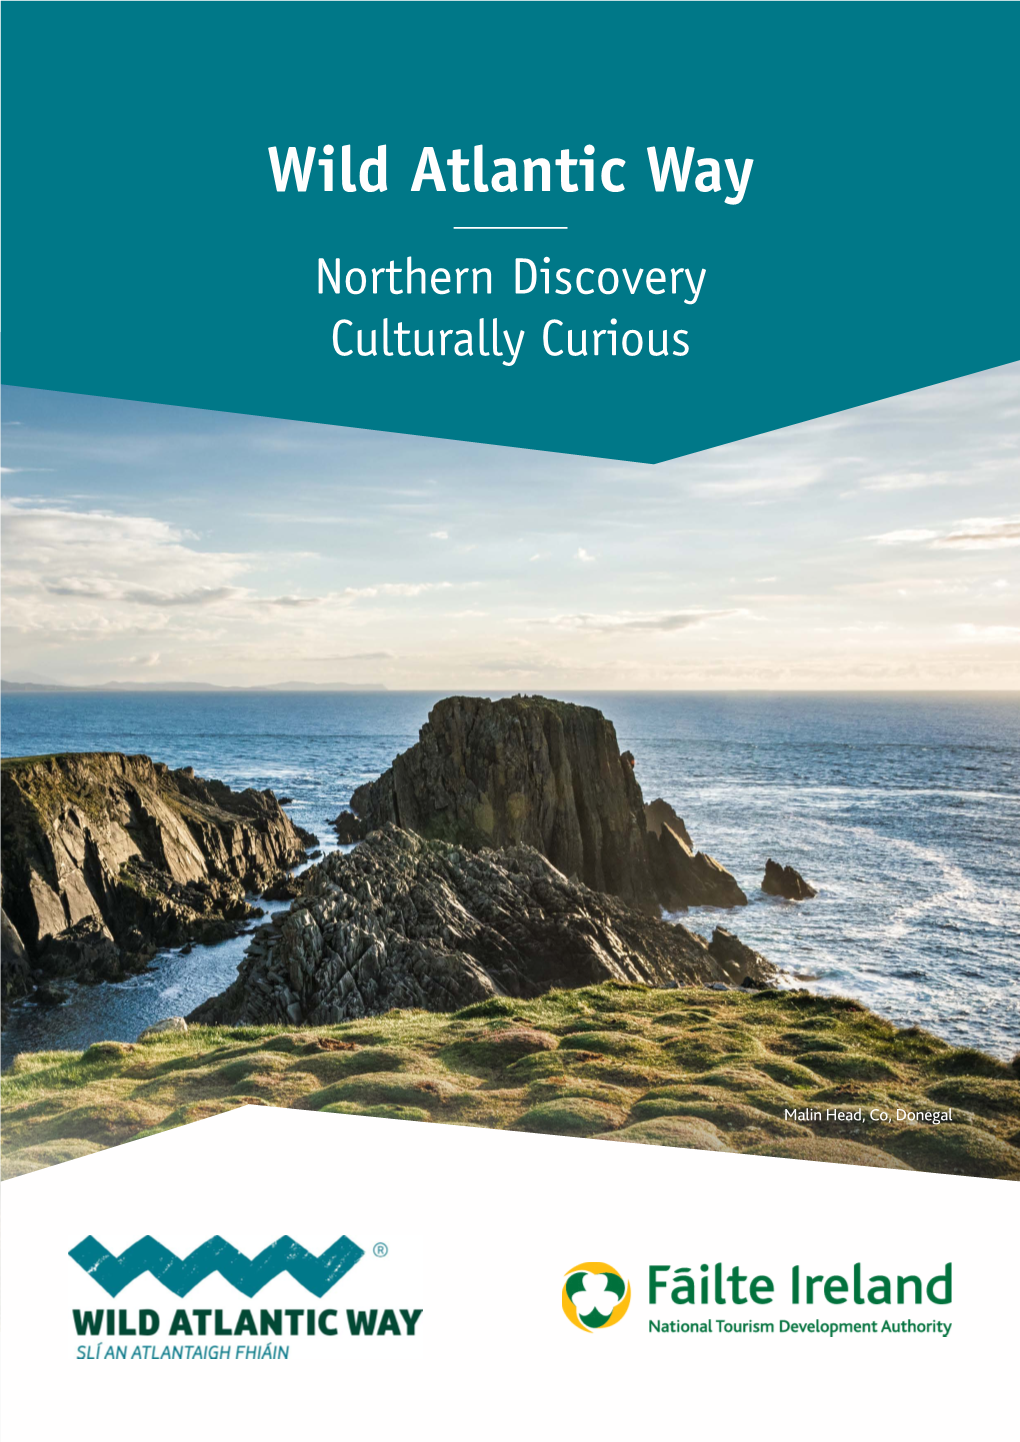 Download the Northern Discovery Culturally Curious